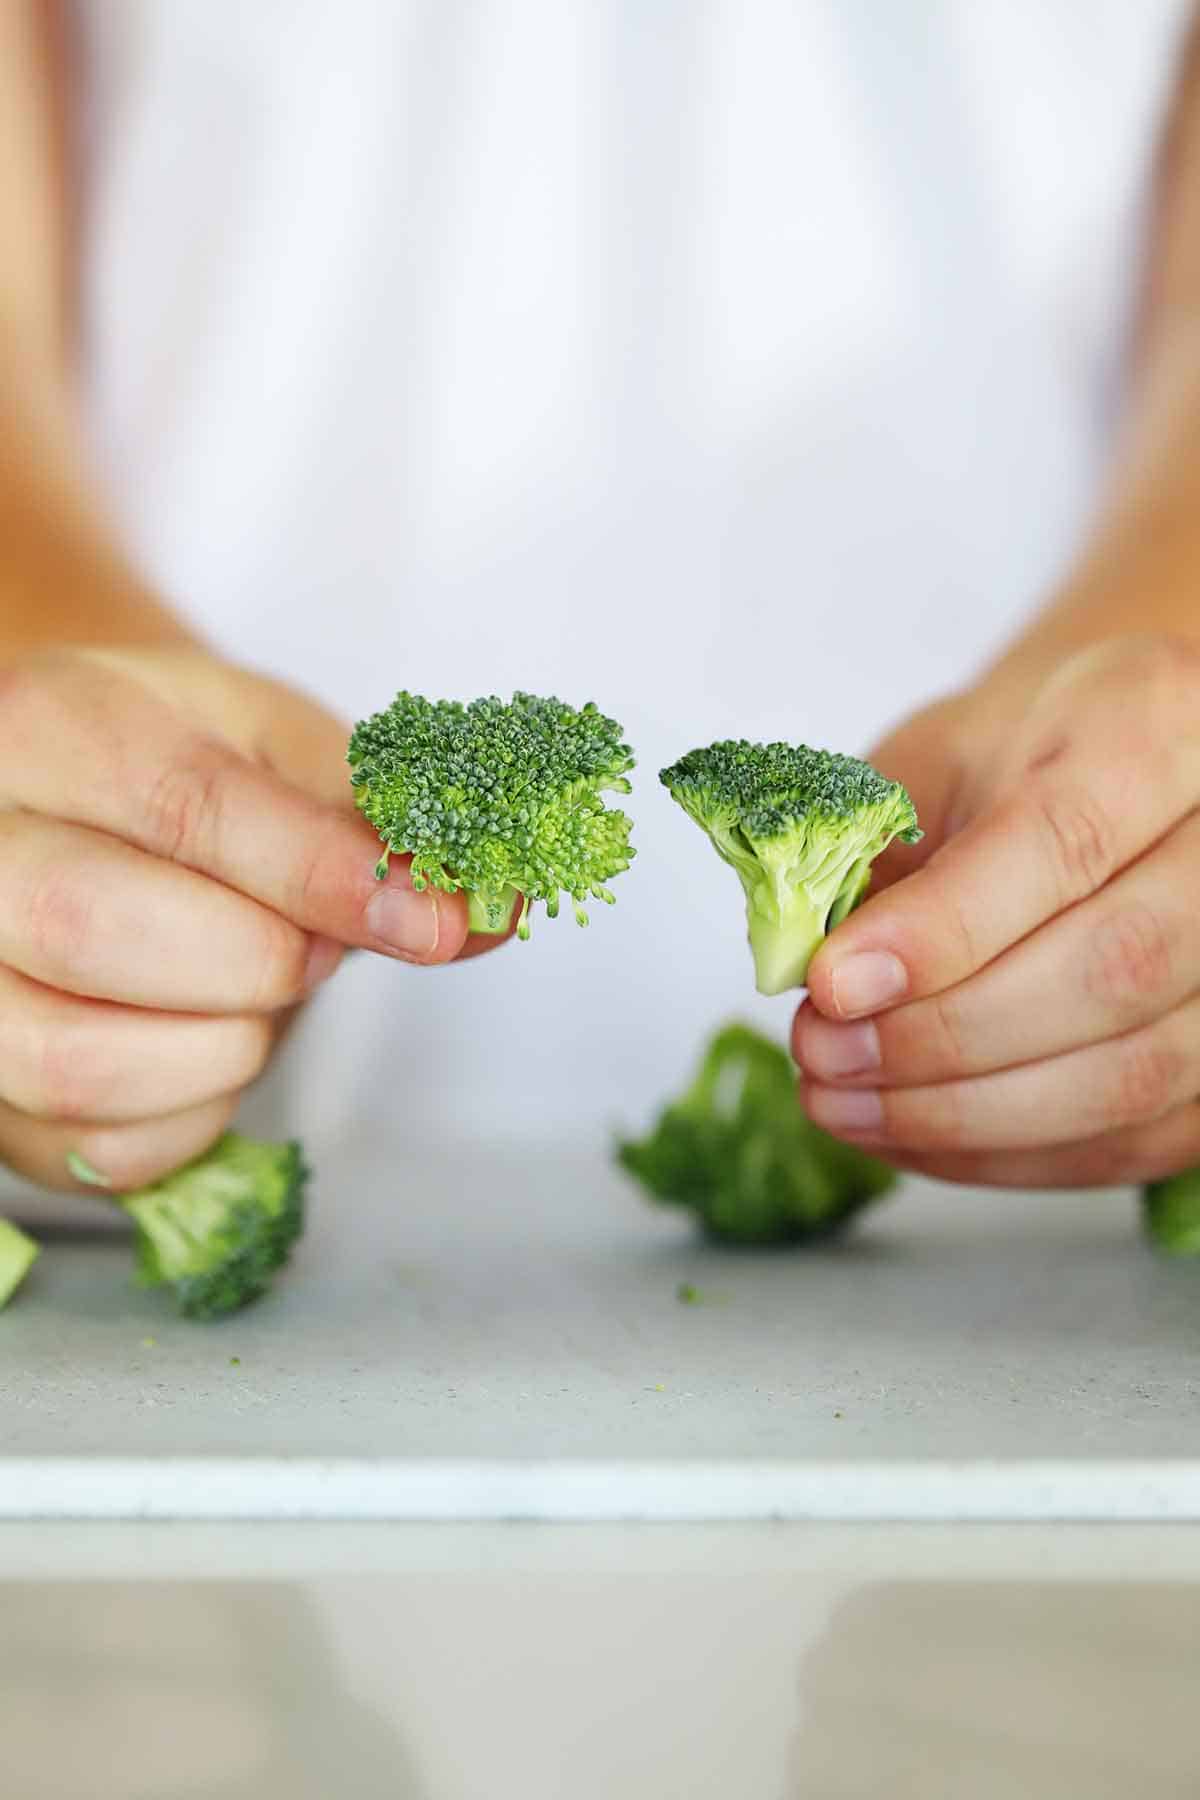 Someone holding two small florets of broccoli.